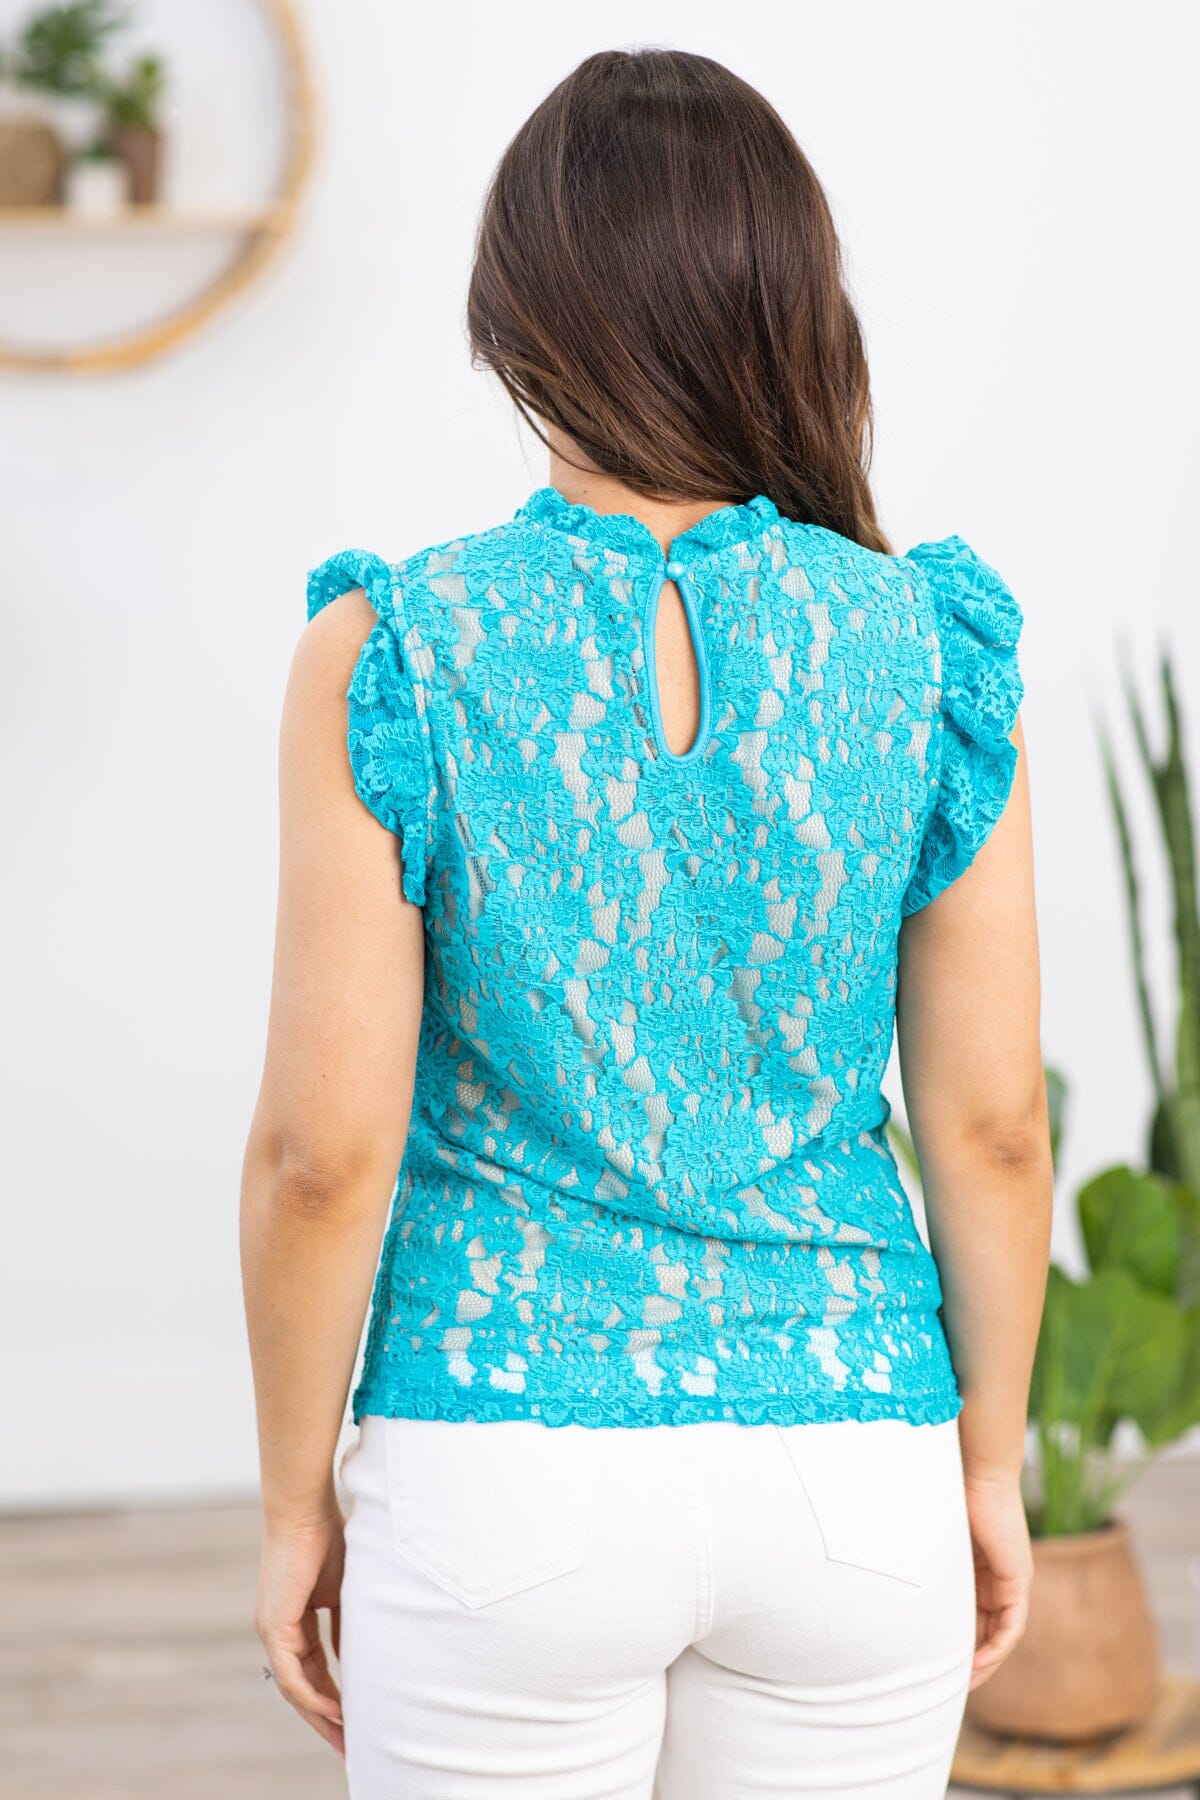 Turquoise Lace Ruffle Trim Lined Top - Filly Flair